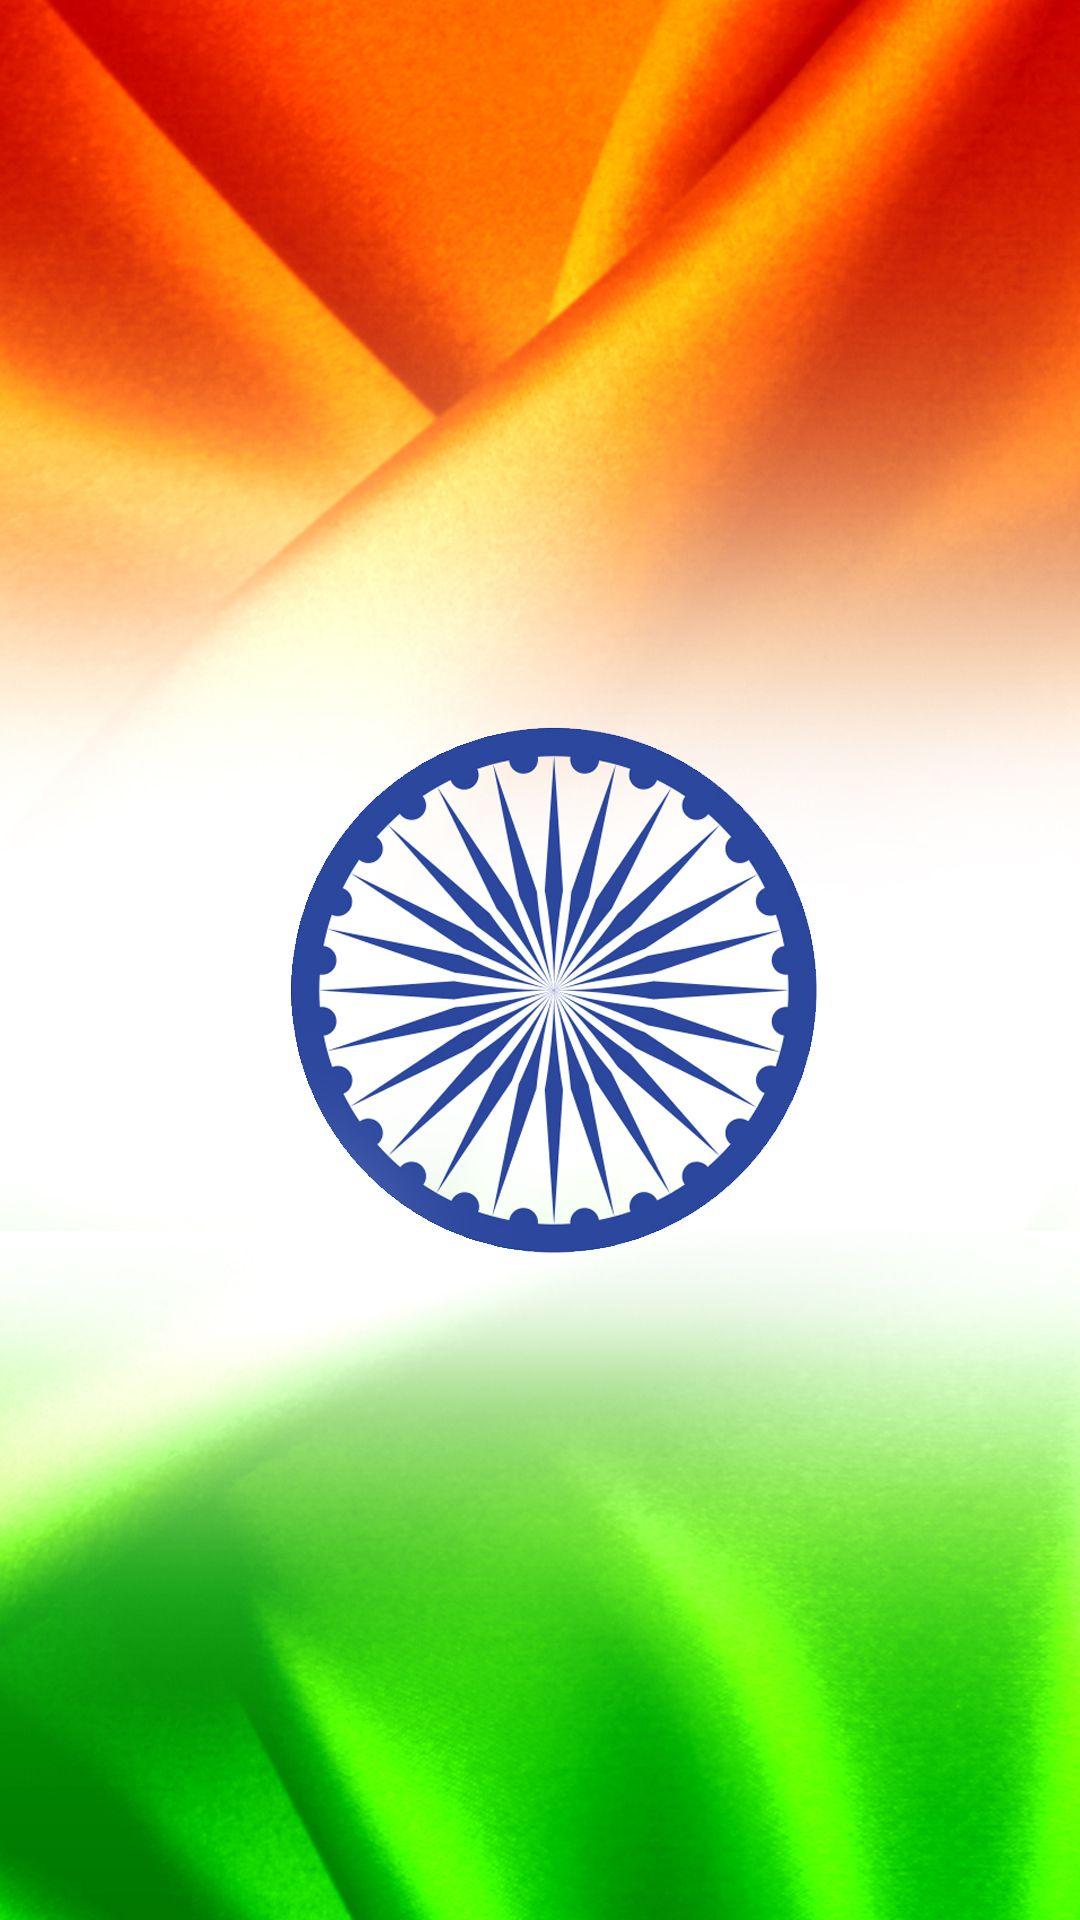 India Flag for Mobile Phone Wallpaper 11 of 17